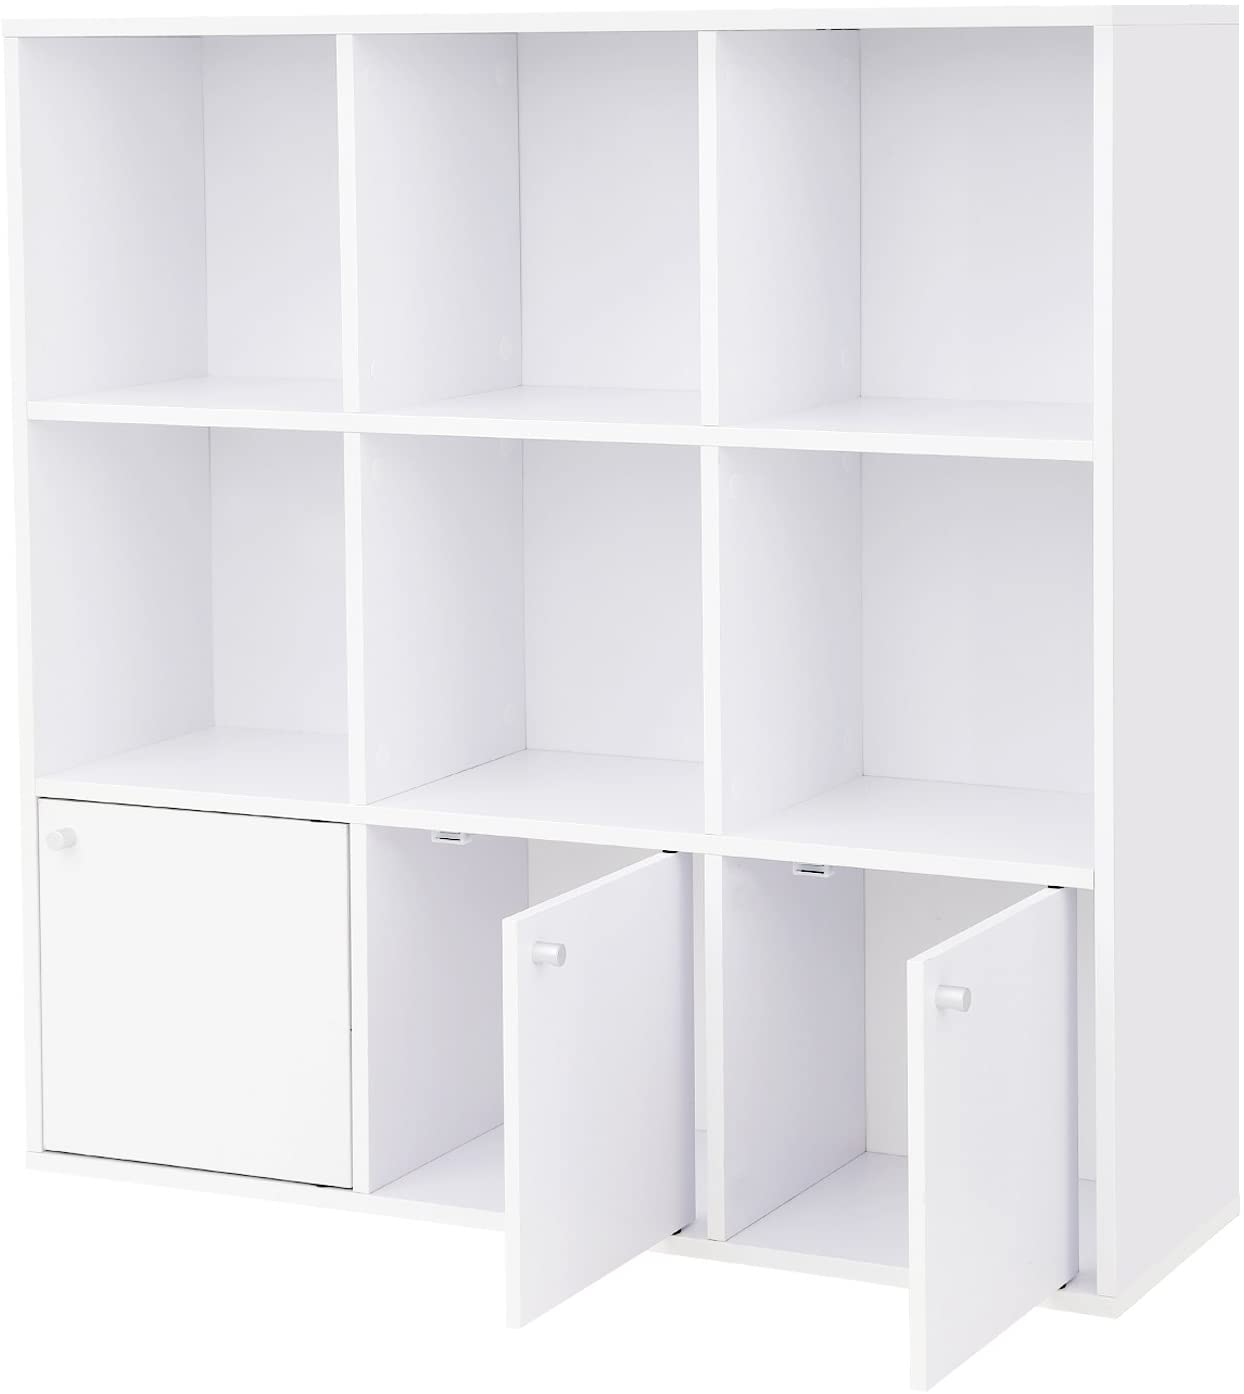 Wooden Storage Bookcase, Home or Office Display Shelf, Freestanding Cube Unit DVD Rack Bookshelf with 3 Bottom Cabinets, White, LBC33WT RAW58.dk 